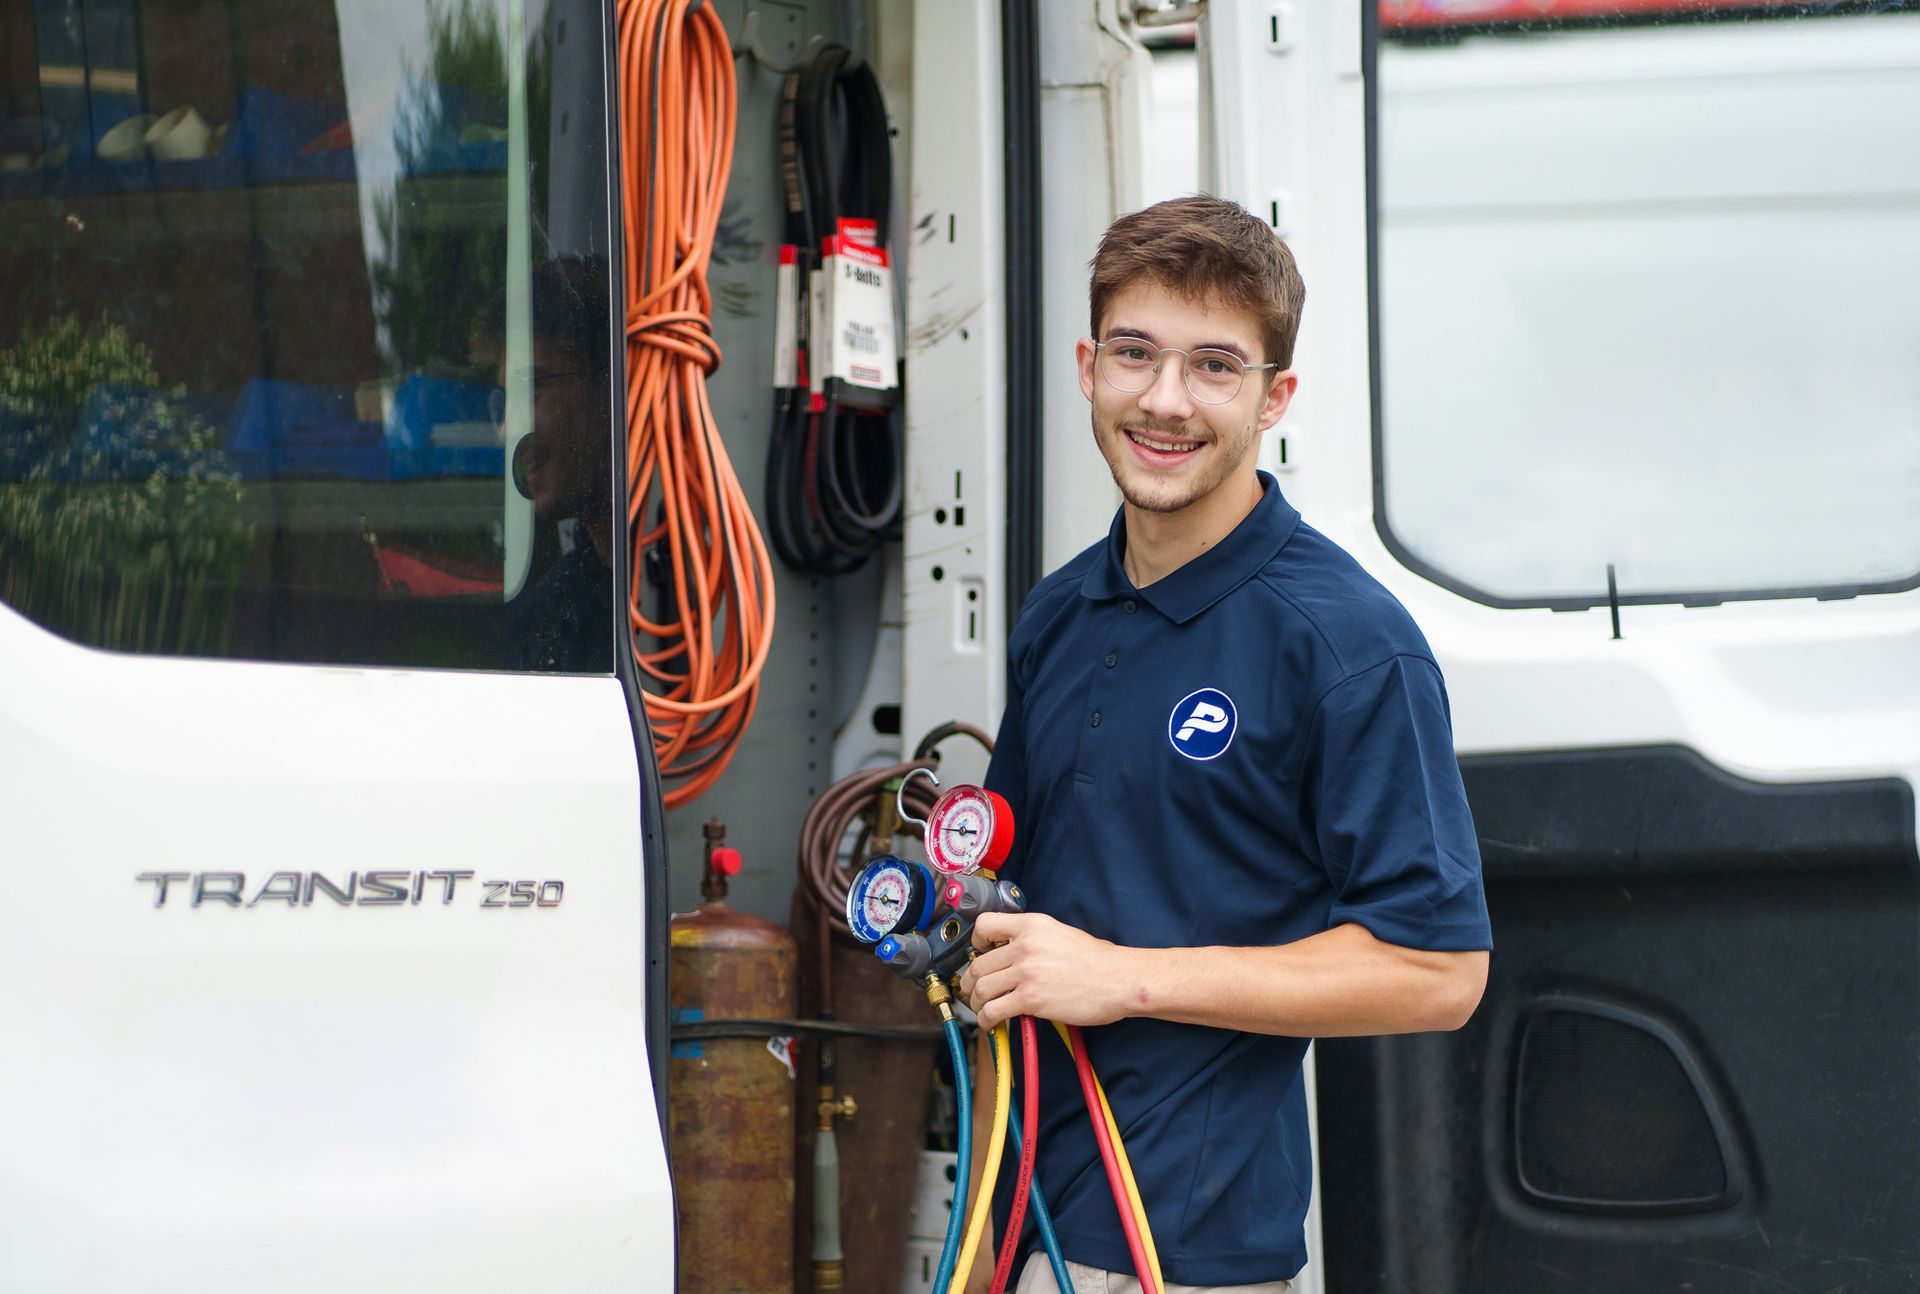 Prevett Heating and Cooling |A young man is standing in front of a white van holding a hose.